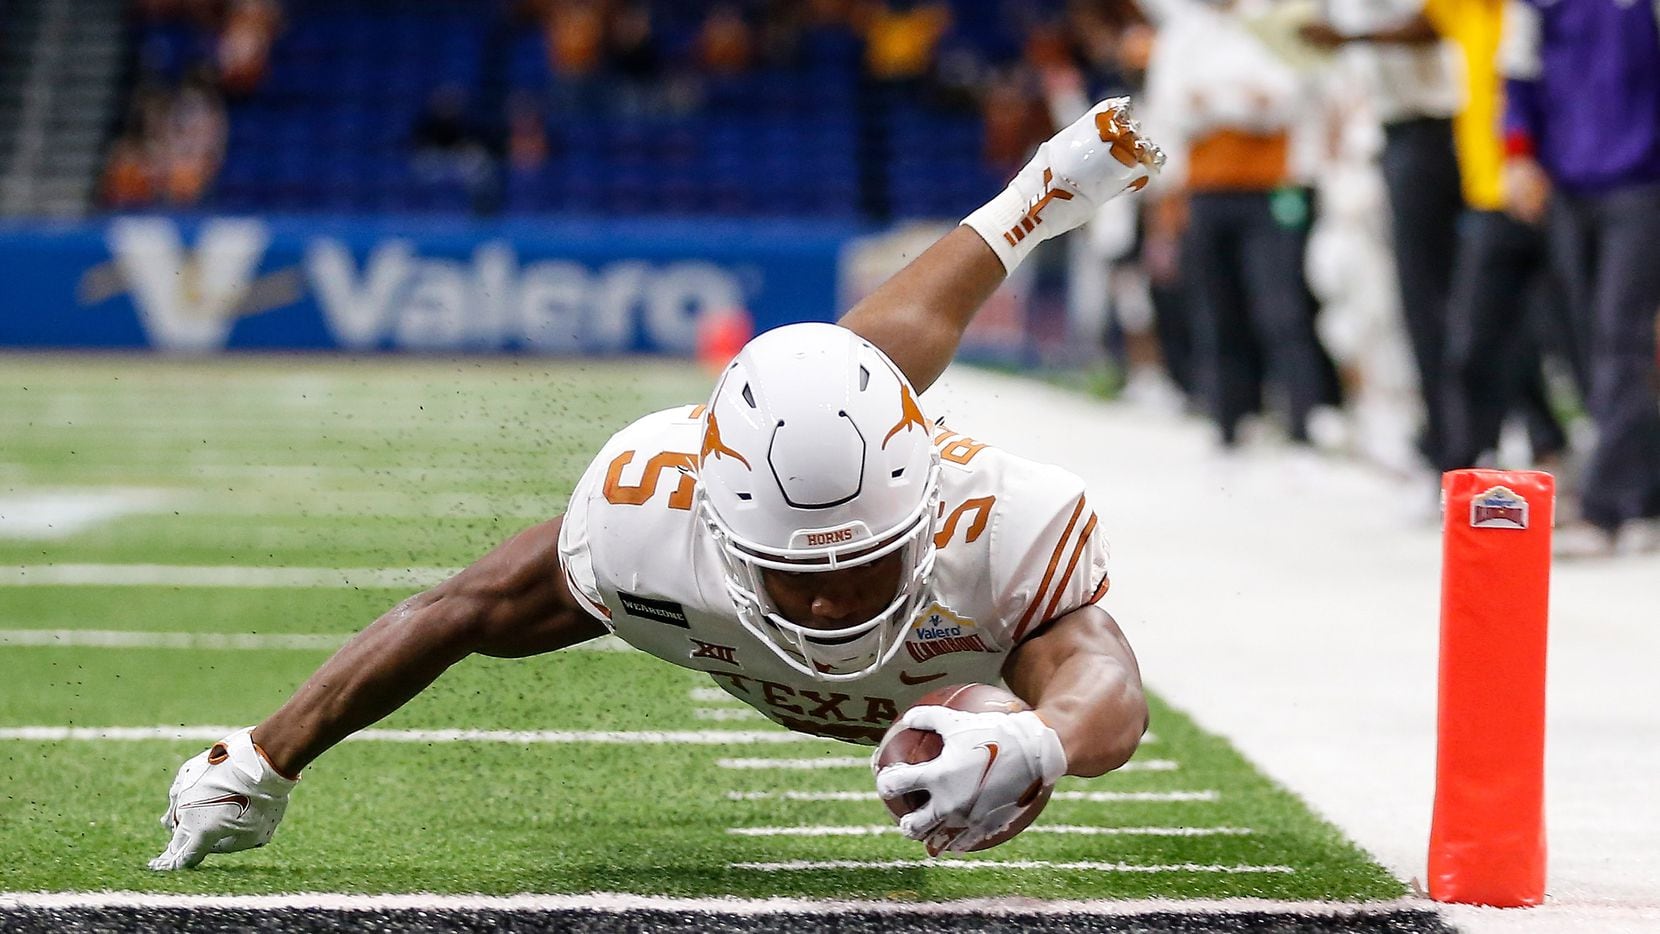 SAN ANTONIO, TEXAS - DECEMBER 29: Bijan Robinson #5 of the Texas Longhorns dives for a touchdown in the first quarter against the Colorado Buffaloes during the Valero Alamo Bowl at the Alamodome on December 29, 2020 in San Antonio, Texas. (Photo by Tim Warner/Getty Images)